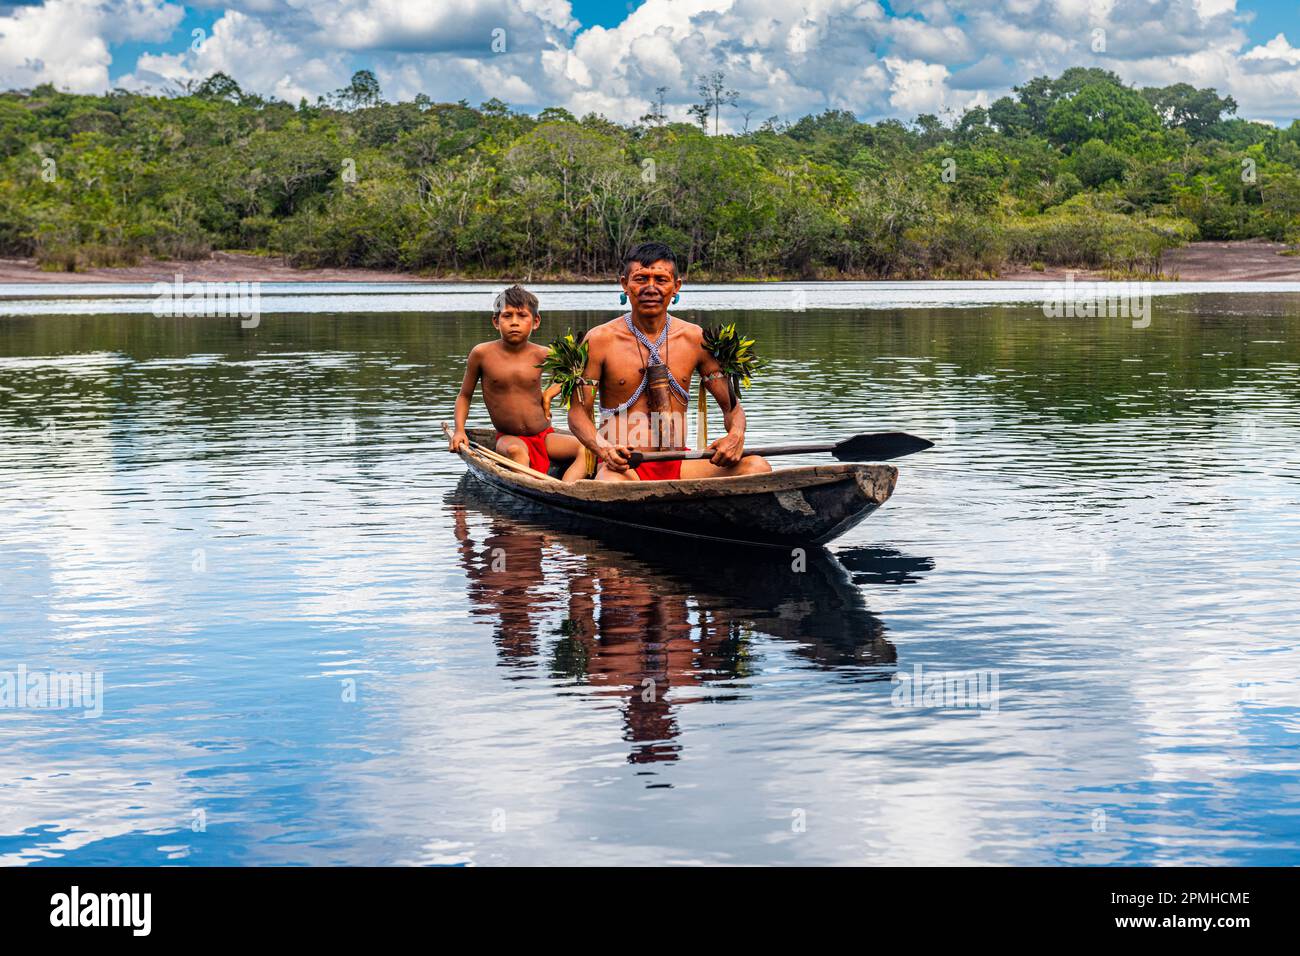 Father and son from the Yanomami tribe in a canoe, southern Venezuela, South America Stock Photo